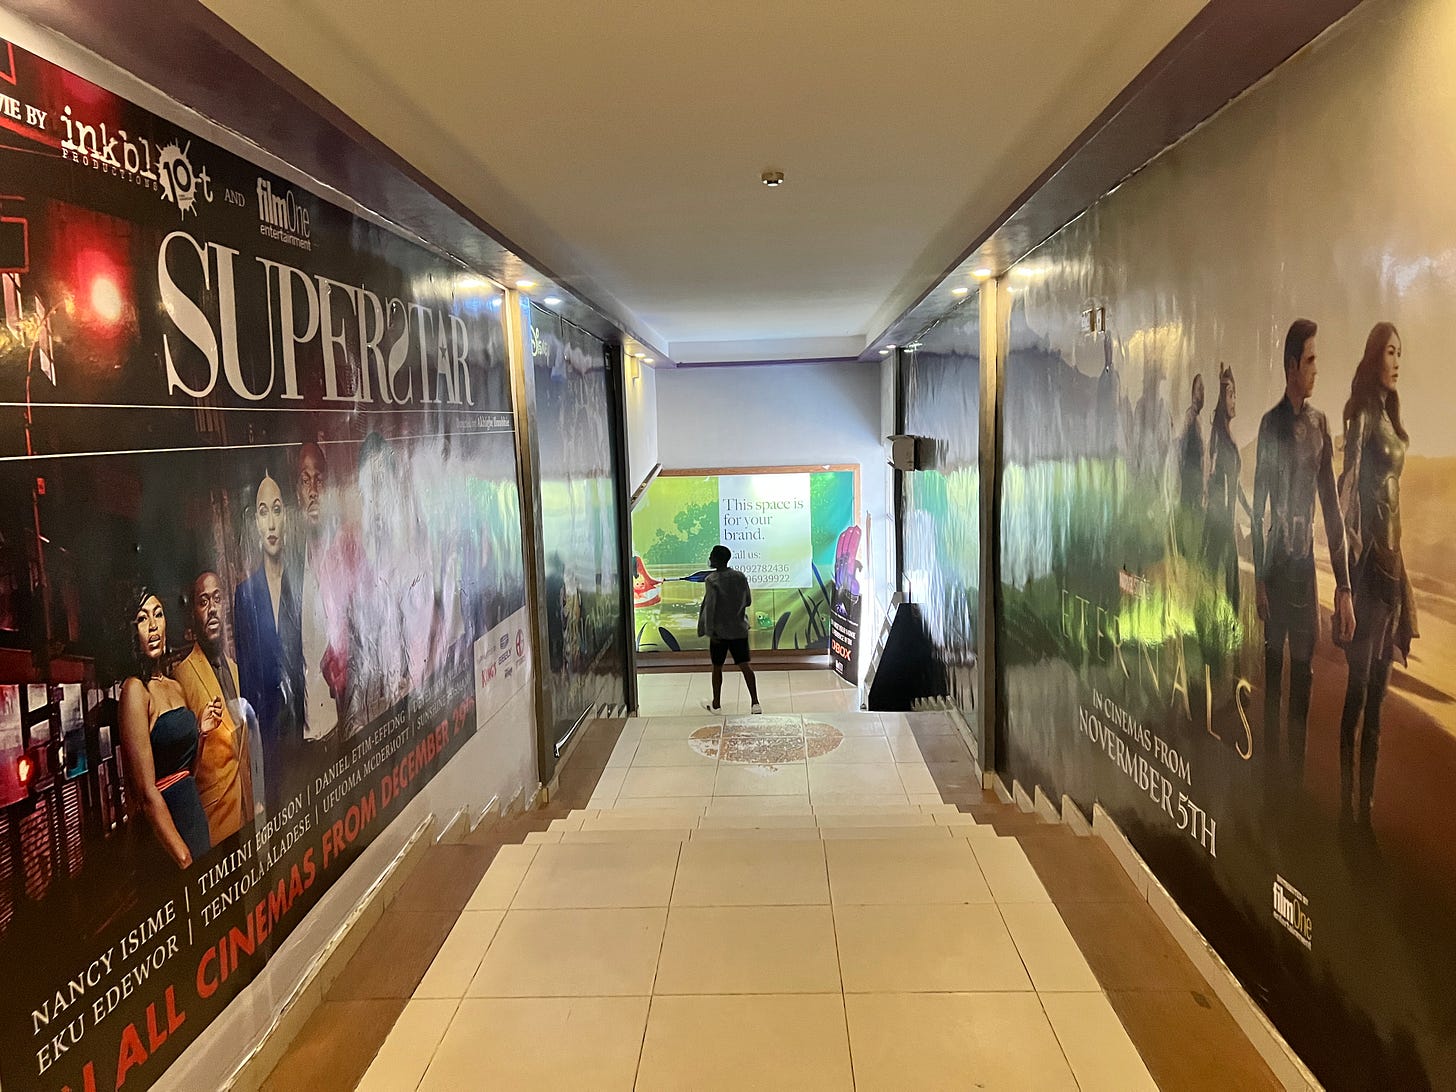 A walkway in the Filmhouse Surulere cinema with movie posters